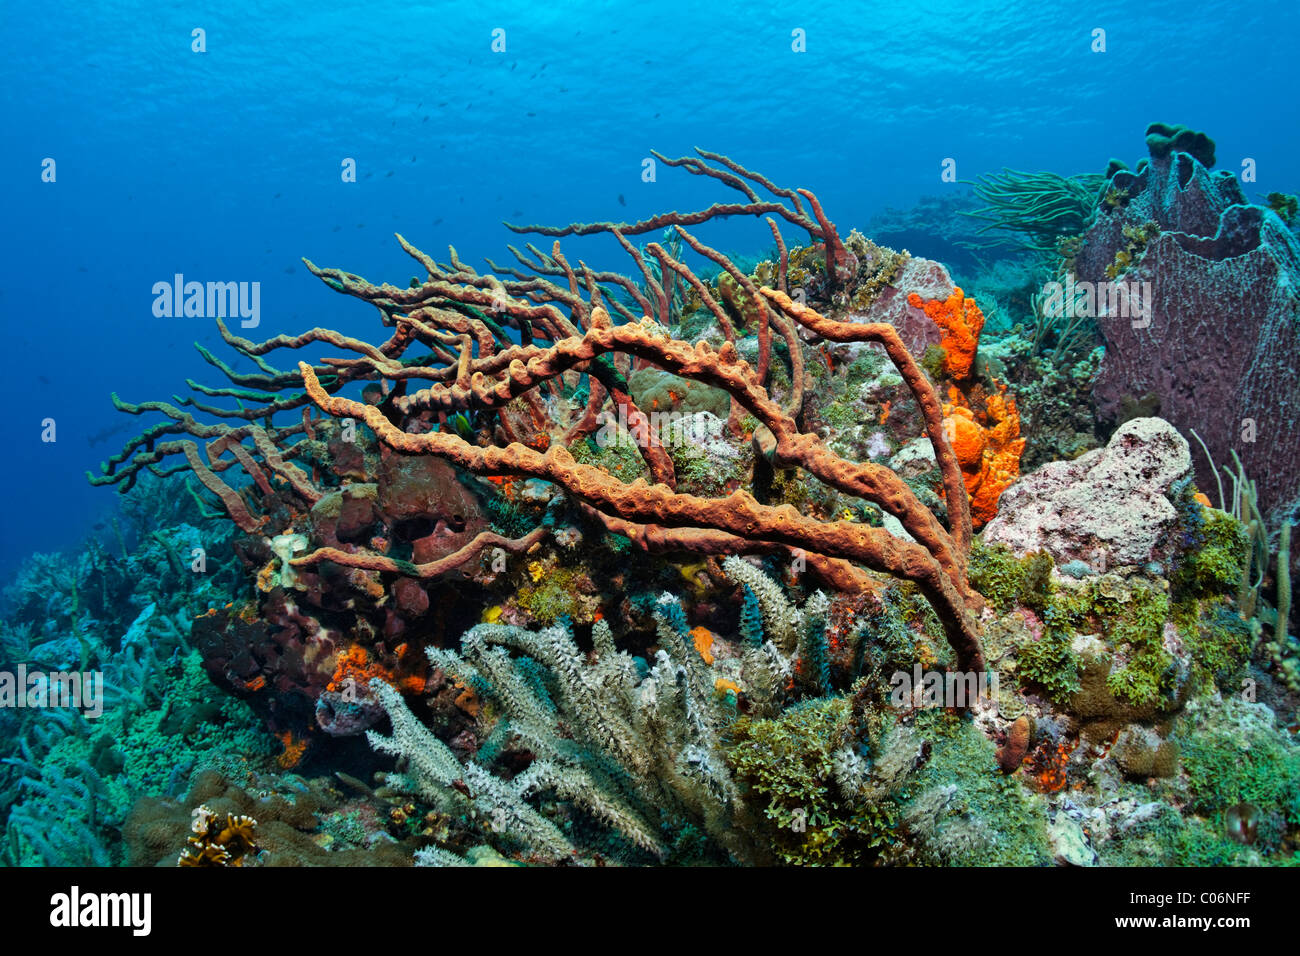 Coral reef, coral block, slope, overgrown, various multicoloured sponges and corals, Little Tobago, Speyside Stock Photo